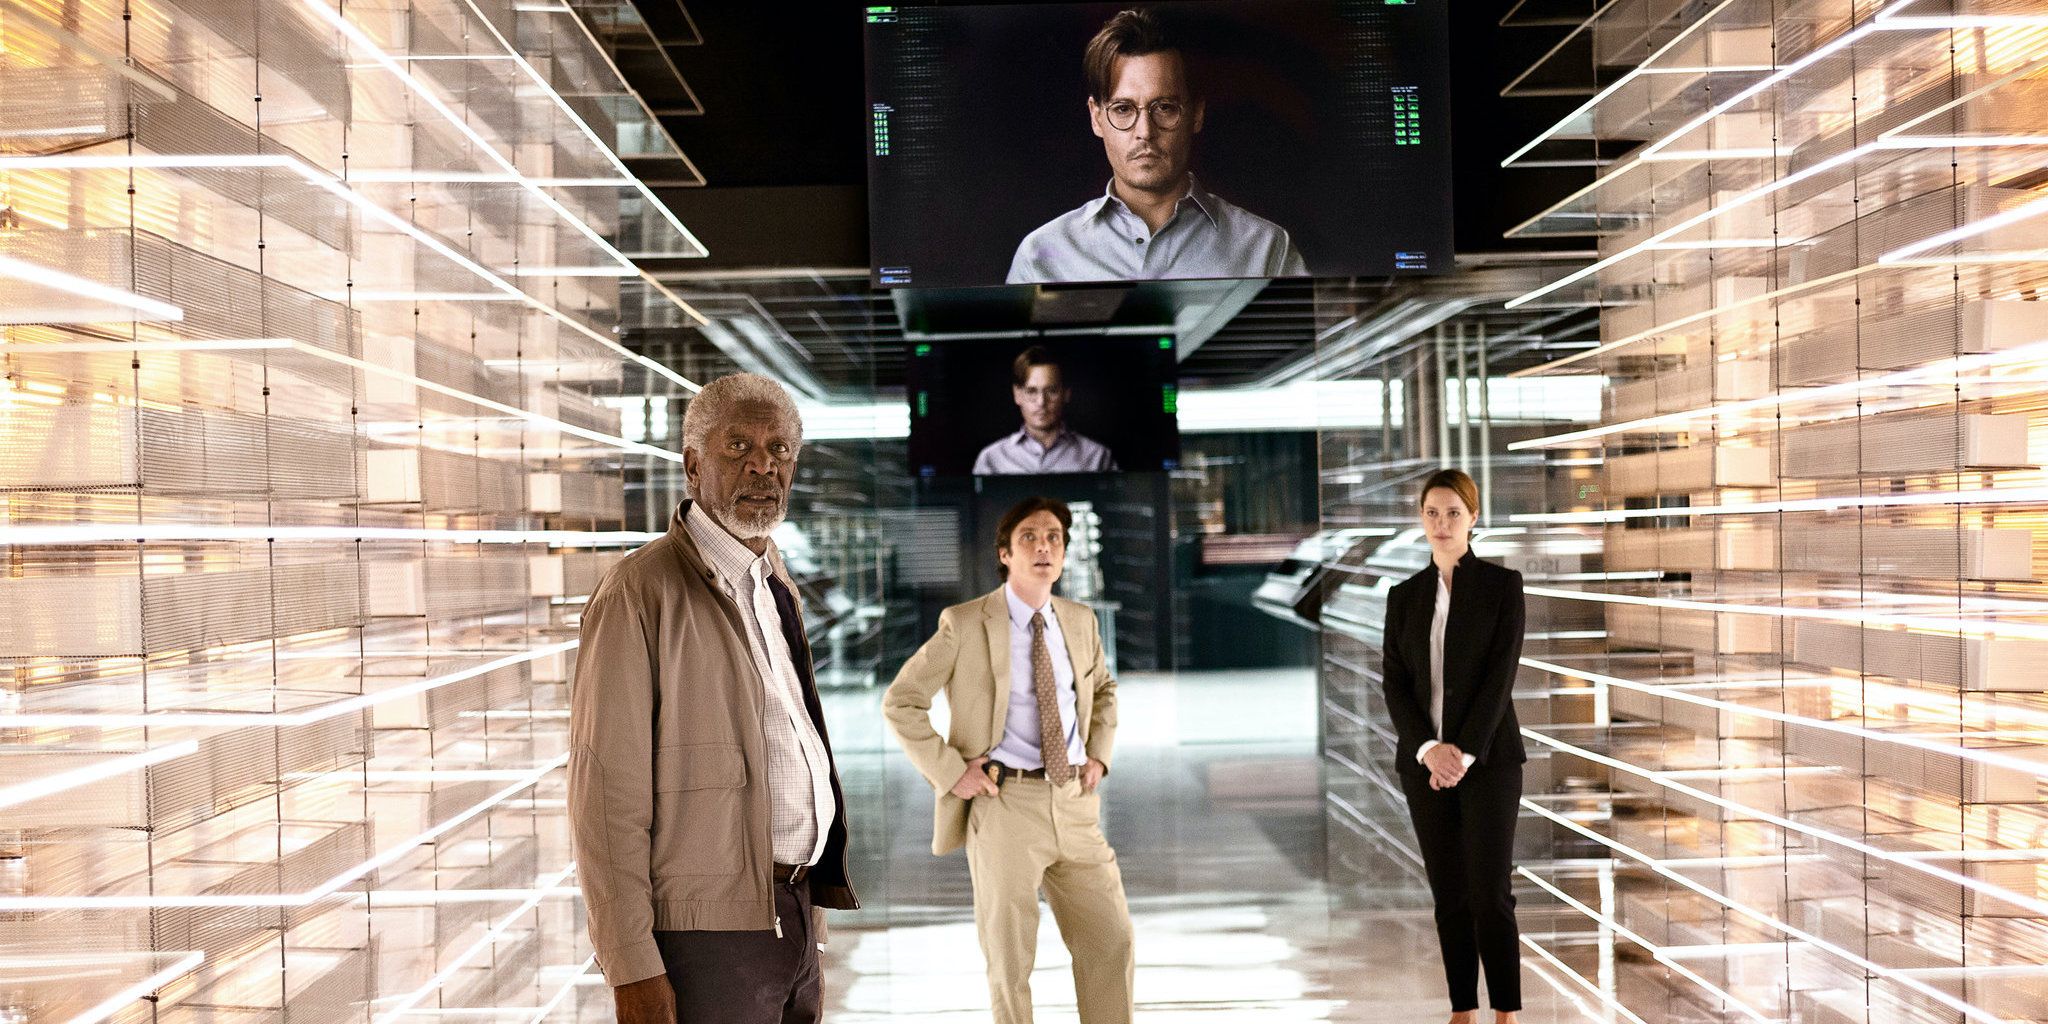 The main characters of Transcendence